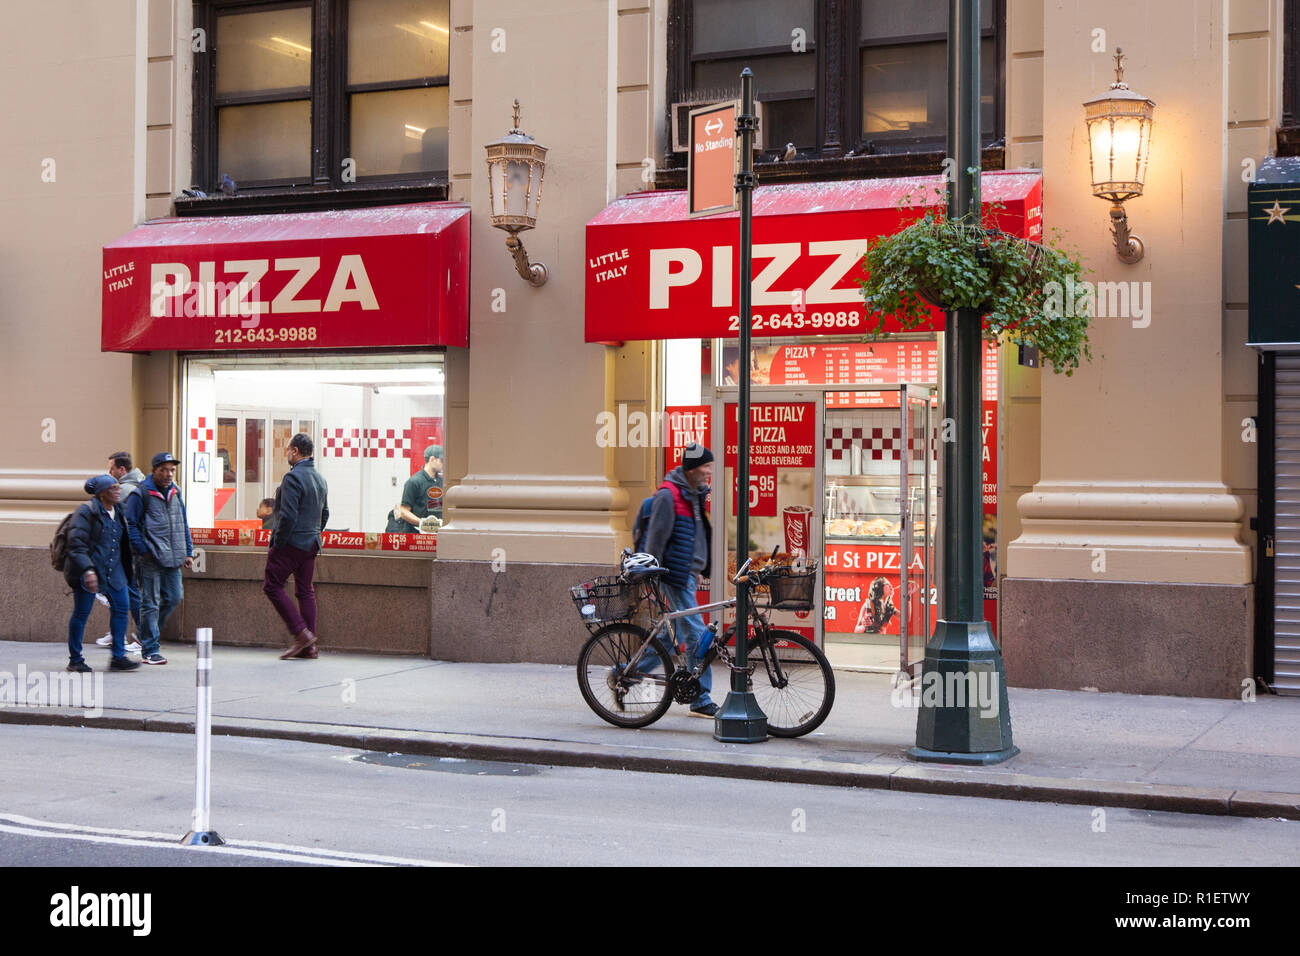 Little Italy Pizzeria  32nd Street , New York City, United States of America. Stock Photo